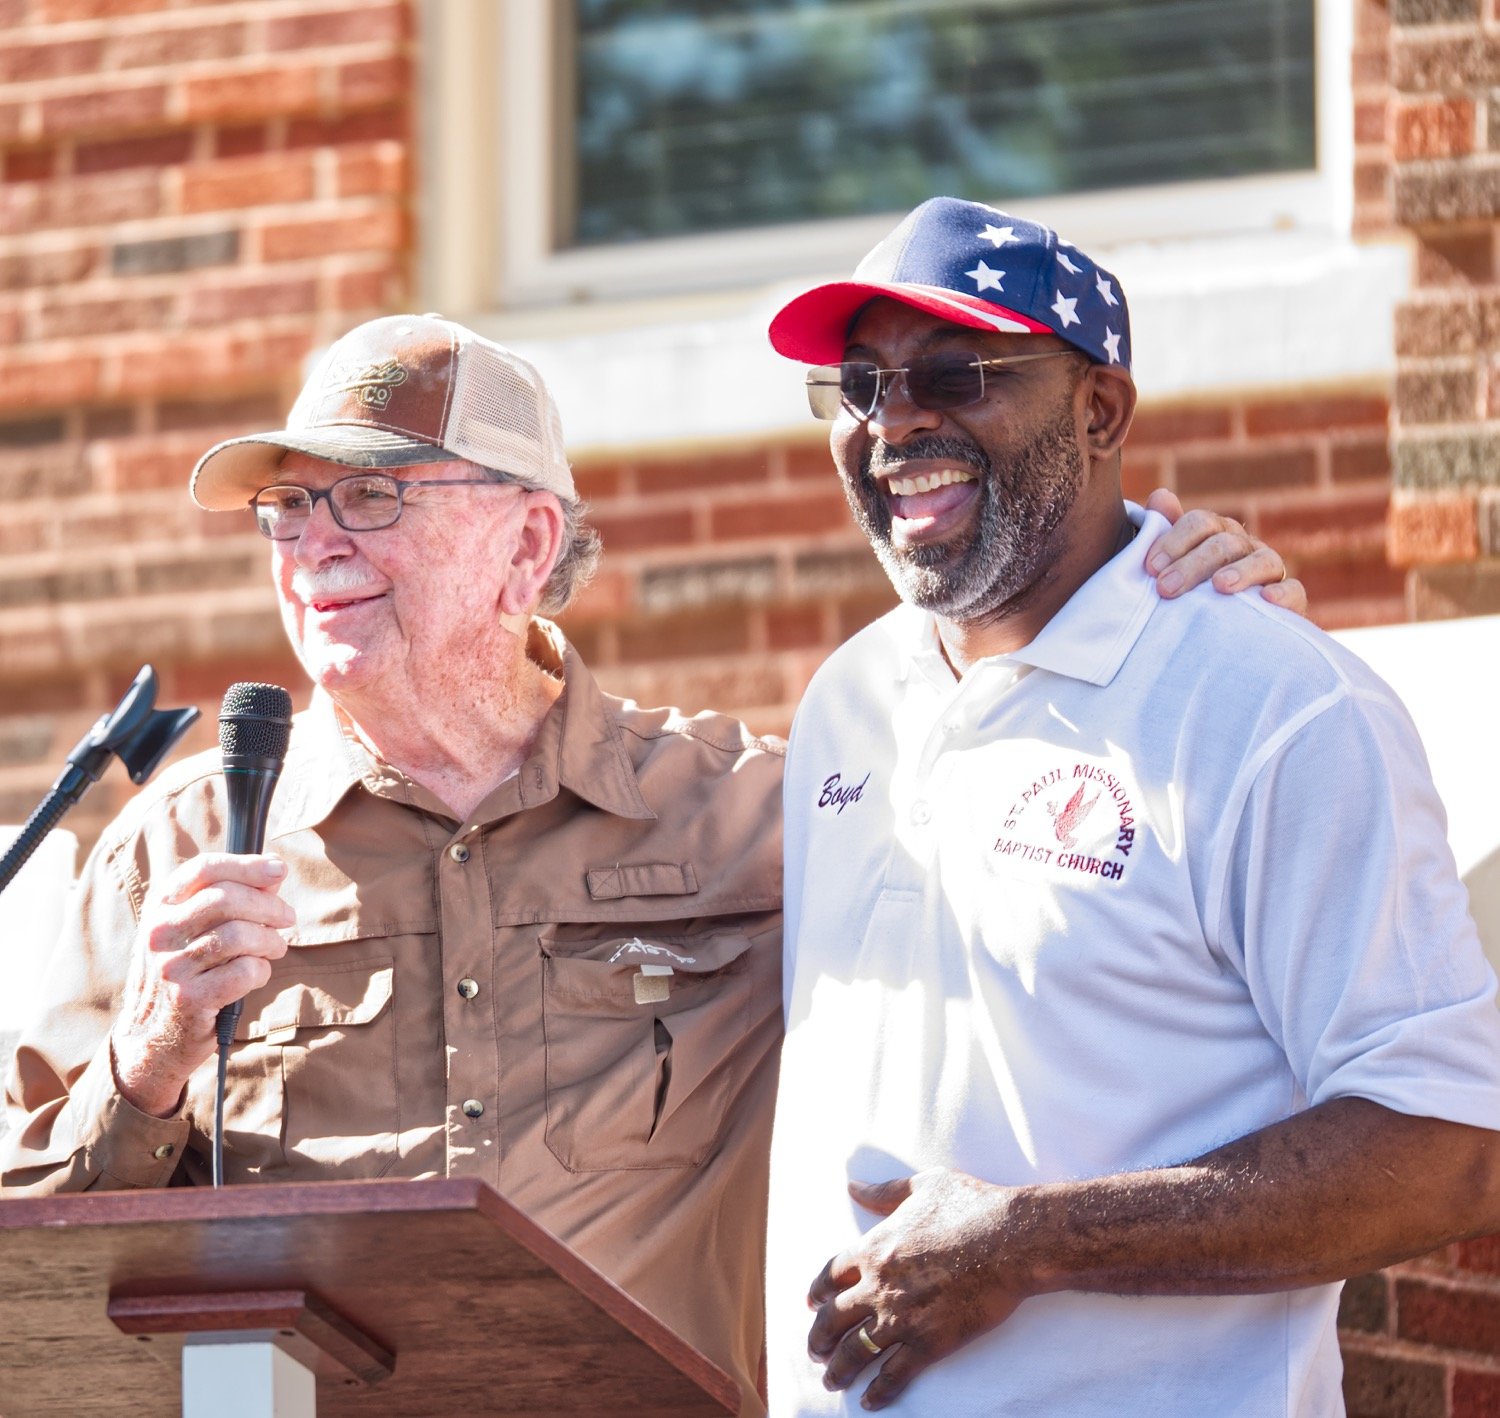 Pastors Jim Clark and Demethrius Boyd have a lighter moment during the prayer service Saturday morning at the county courthouse in Quitman.